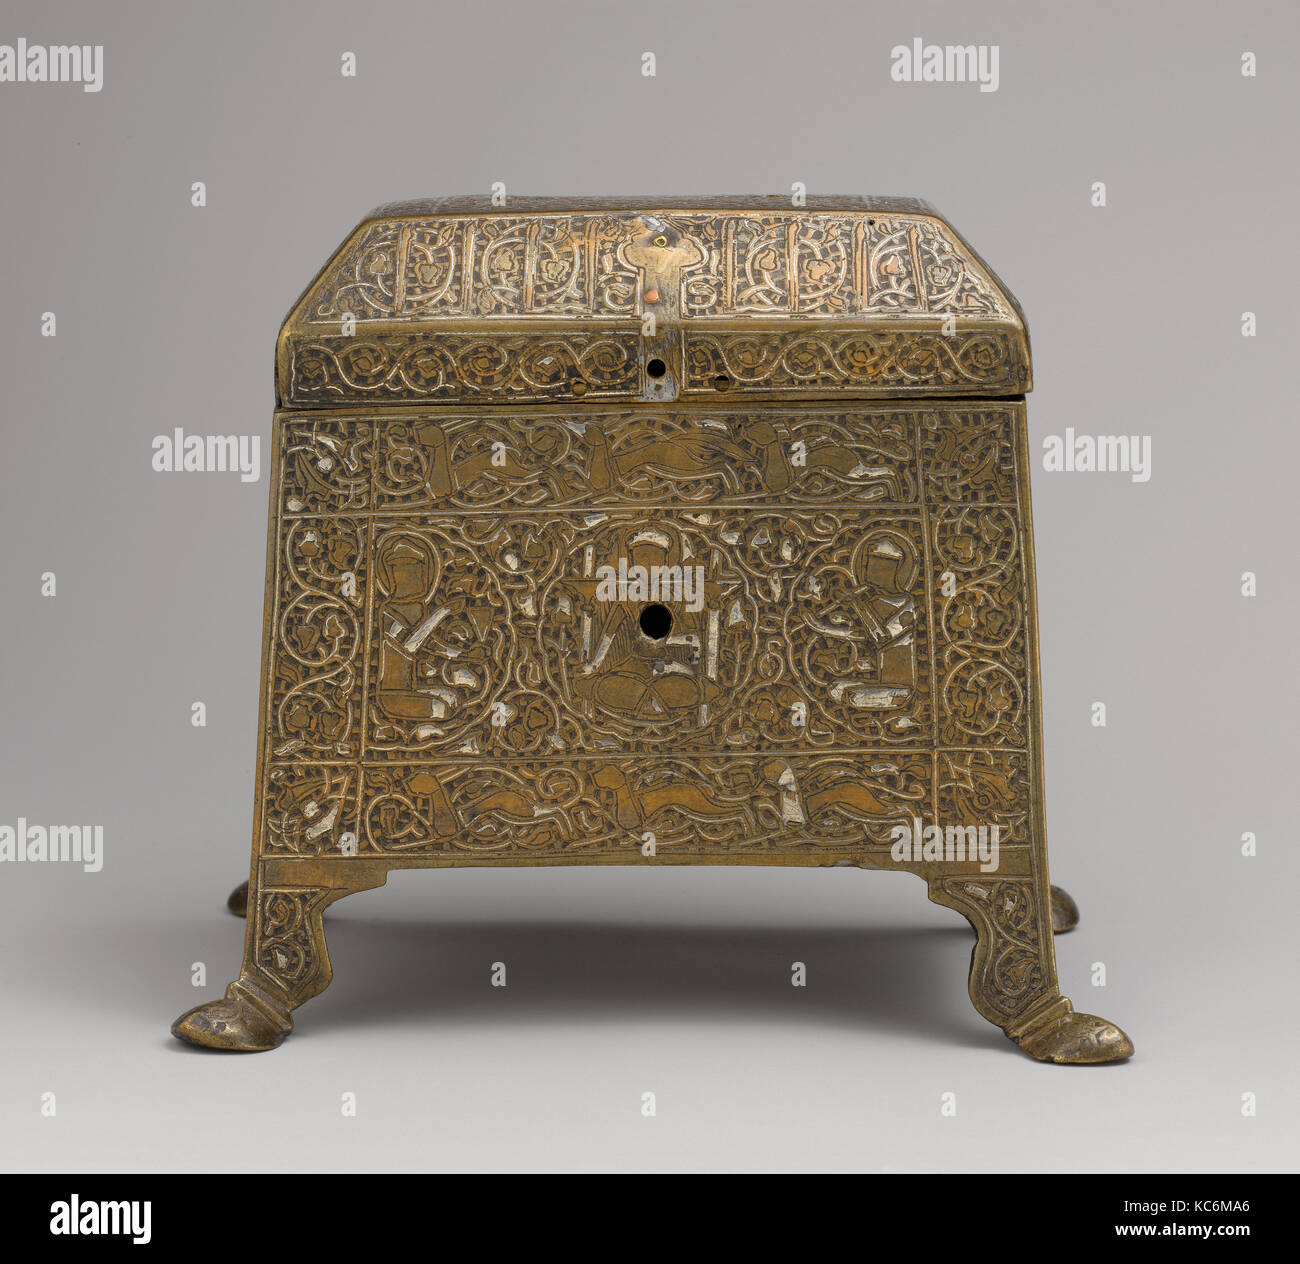 Casket with Figural Imagery, mid-13th century, Attributed to Iran, Brass; worked metal sheet inlaid with silver, H. 5 1/2 in. (1 Stock Photo